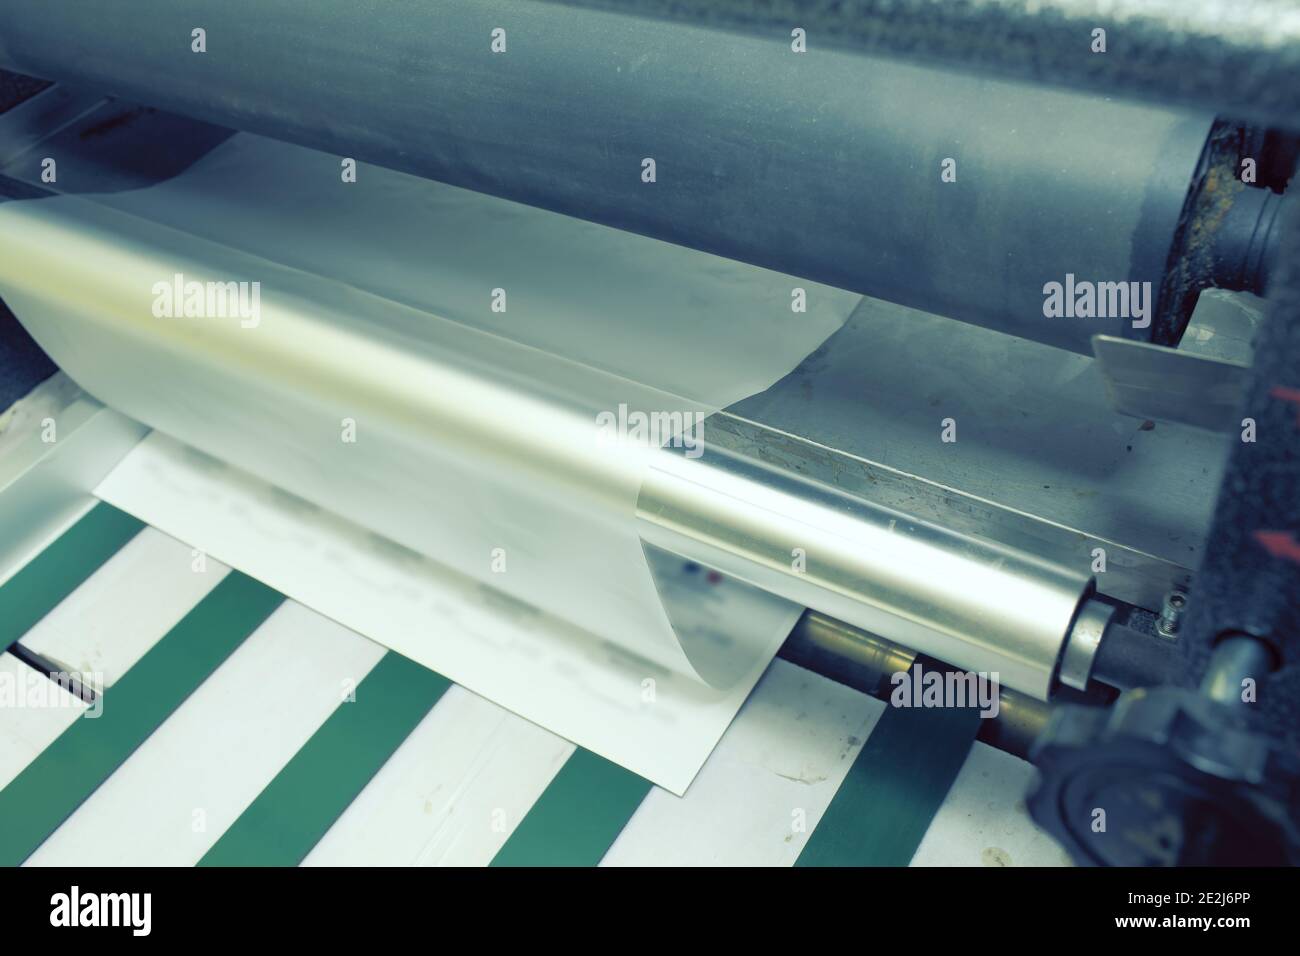 Laminating unit in the print shop. Stock Photo